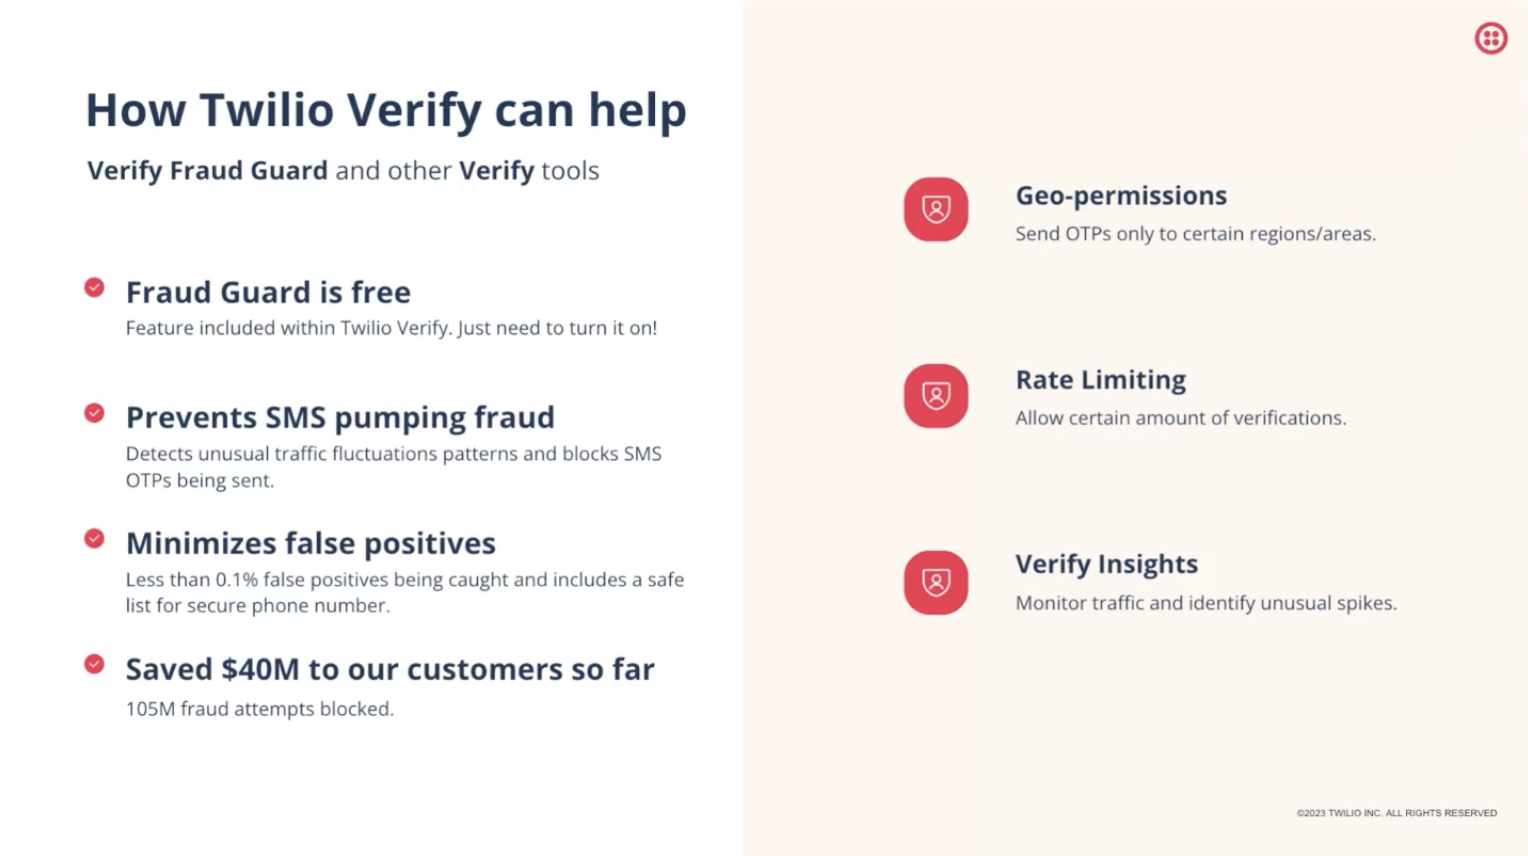 A graphic outlining how Twilio Verify can help companies combat SMS OTP Fraud